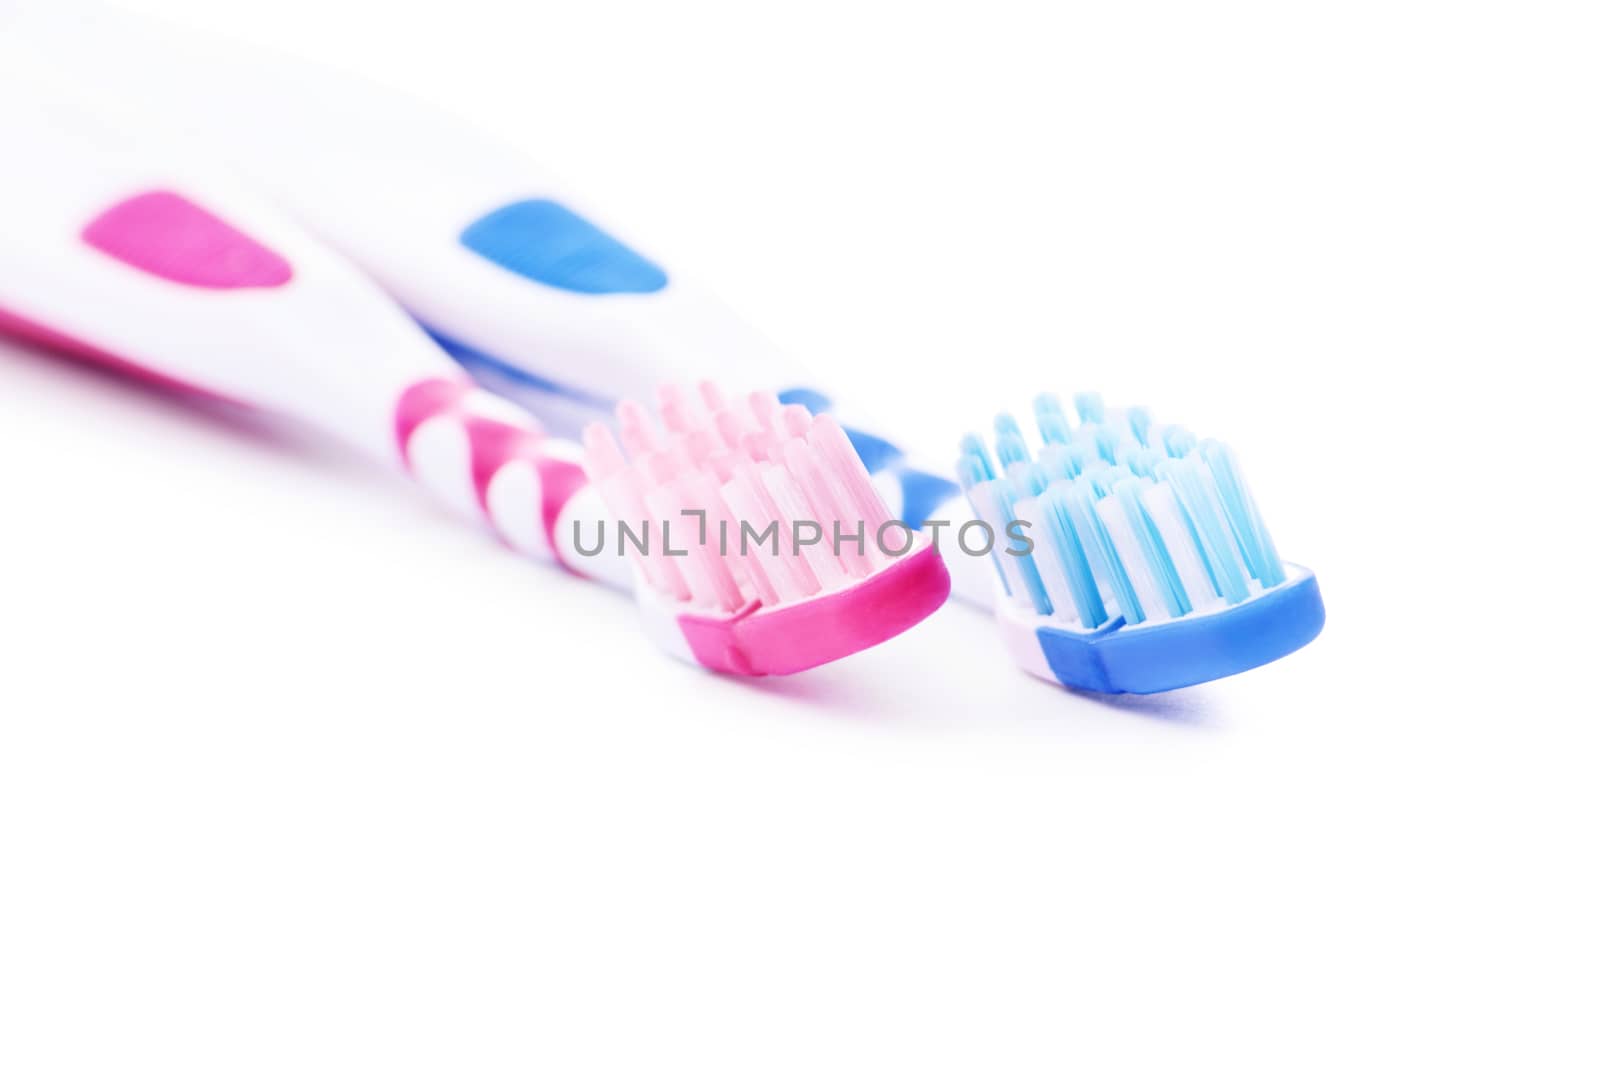 Toothbrushes for him and her by Mendelex